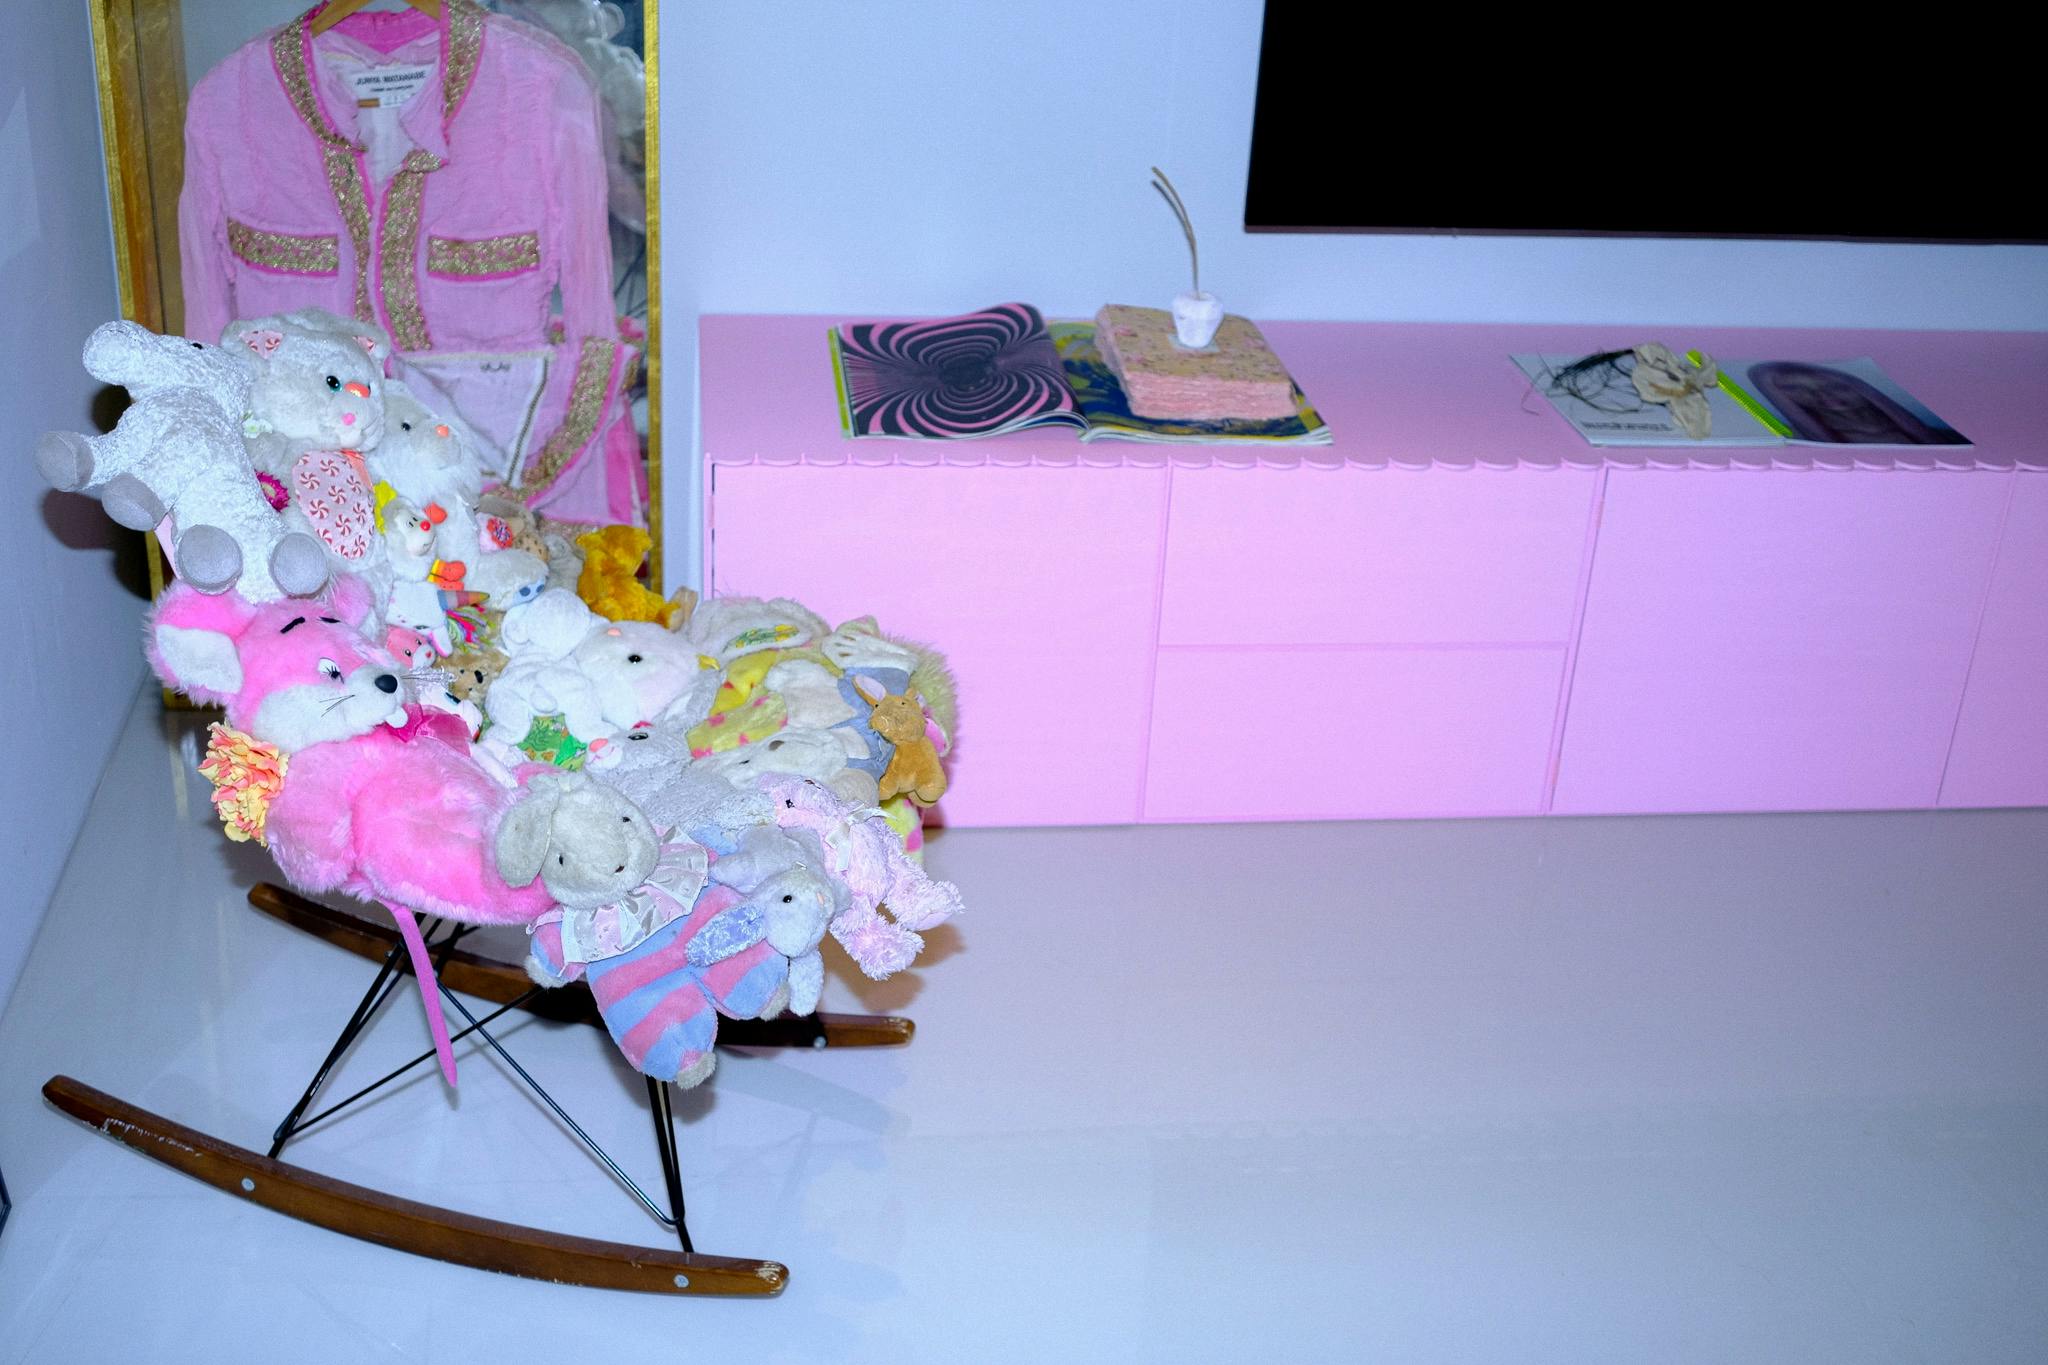 A chair made from Megumi's daughter's childhood stuffed animals in her Tokyo home